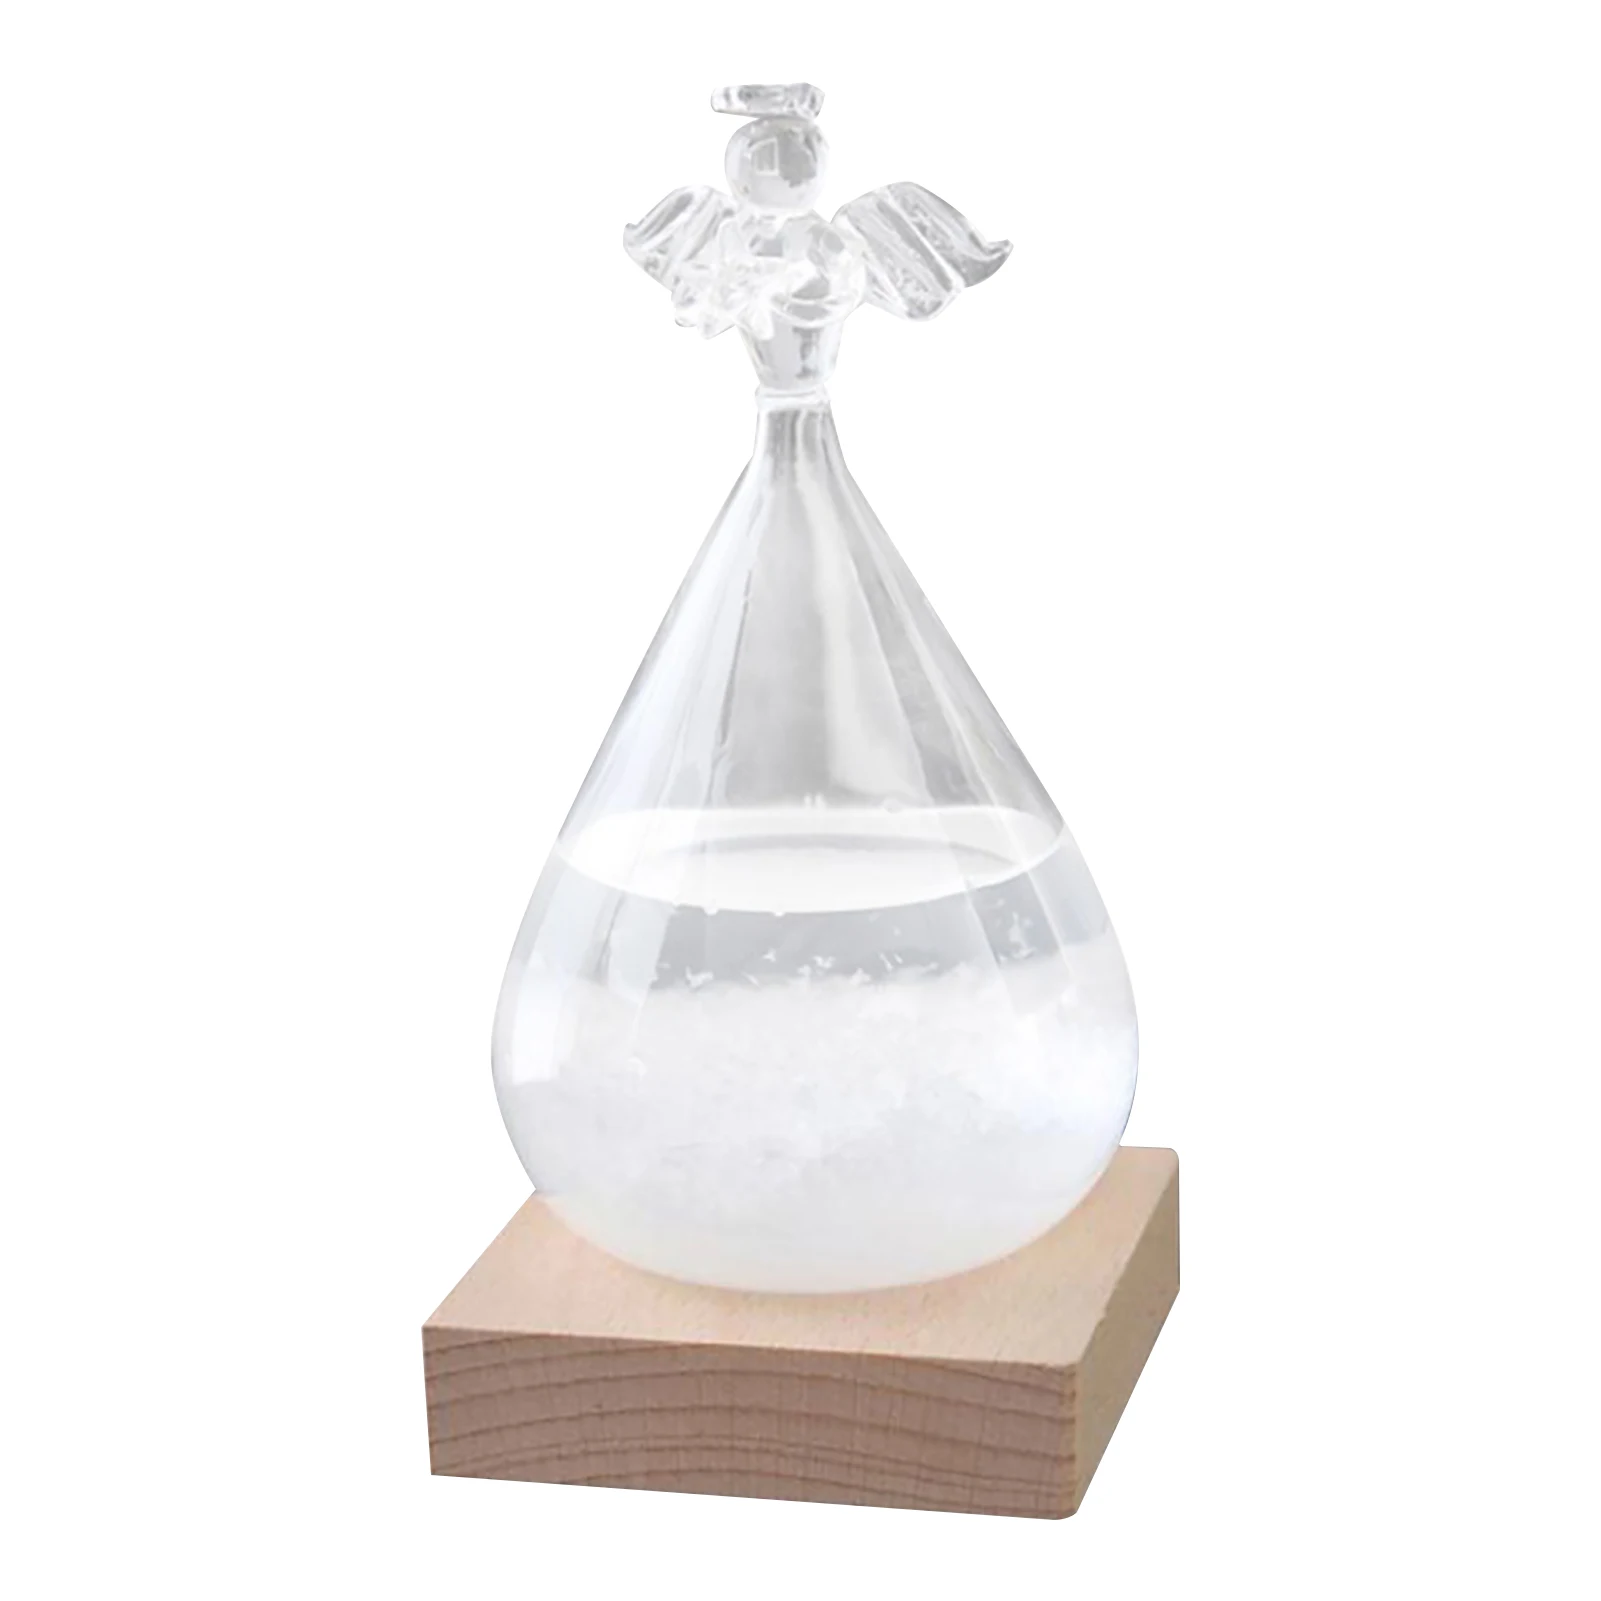 Storm Glass Weather Forecaster Weather Station Fashion Creative Office Desktop and Home Decor Water Drop Glass Bottle 